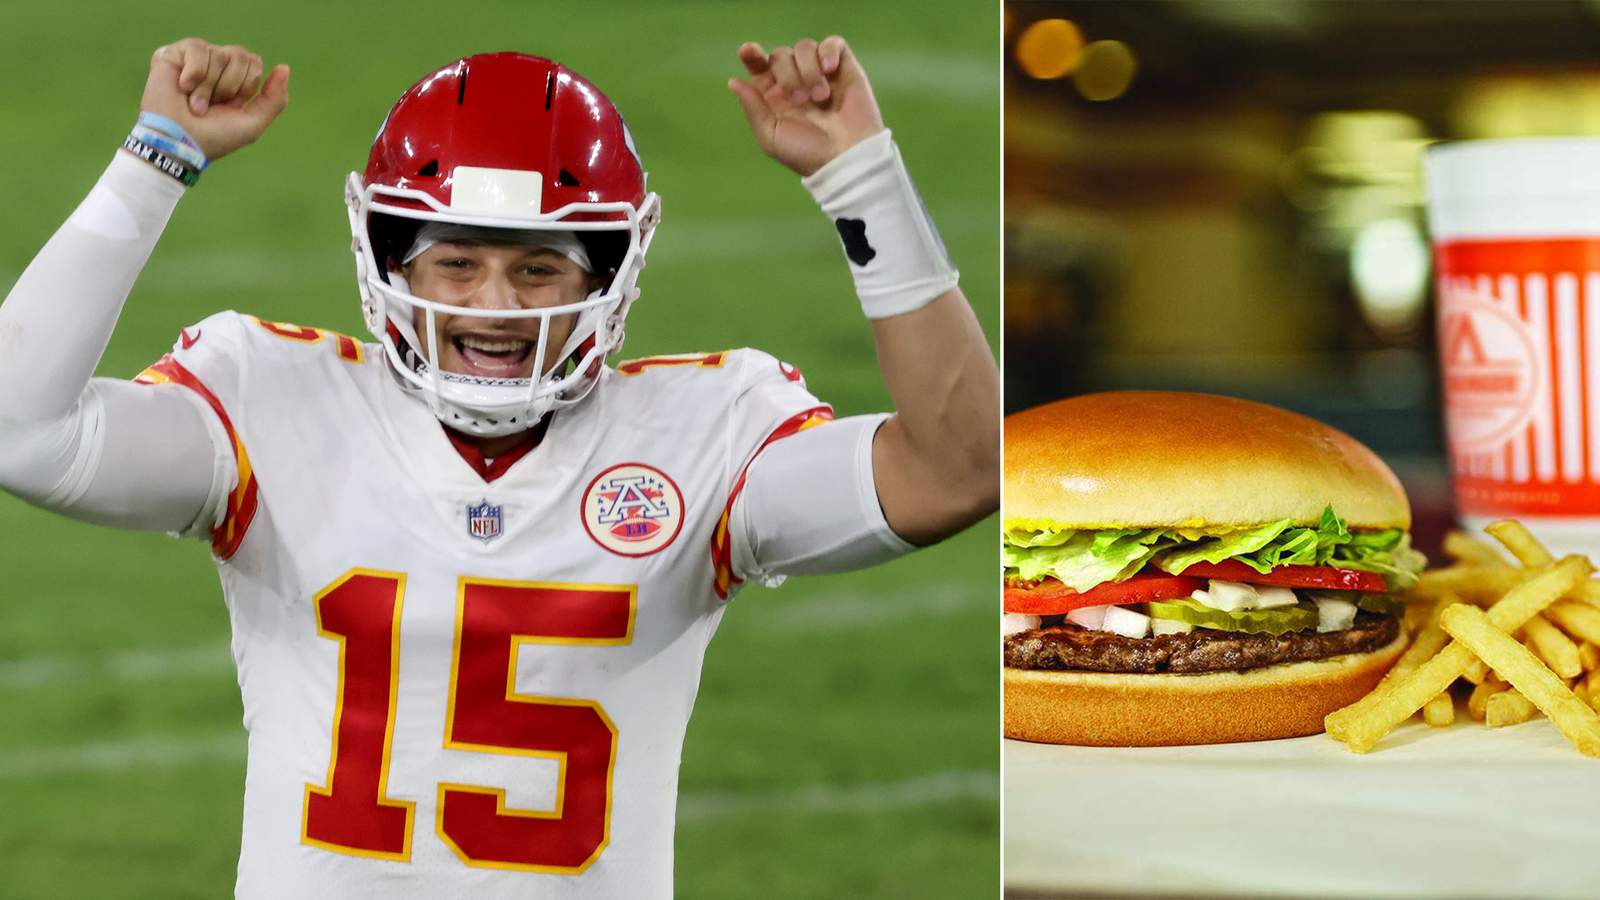 Patrick Mahomes approved: Kansas City suburb OKs Whataburger location amid expansion into Midwest